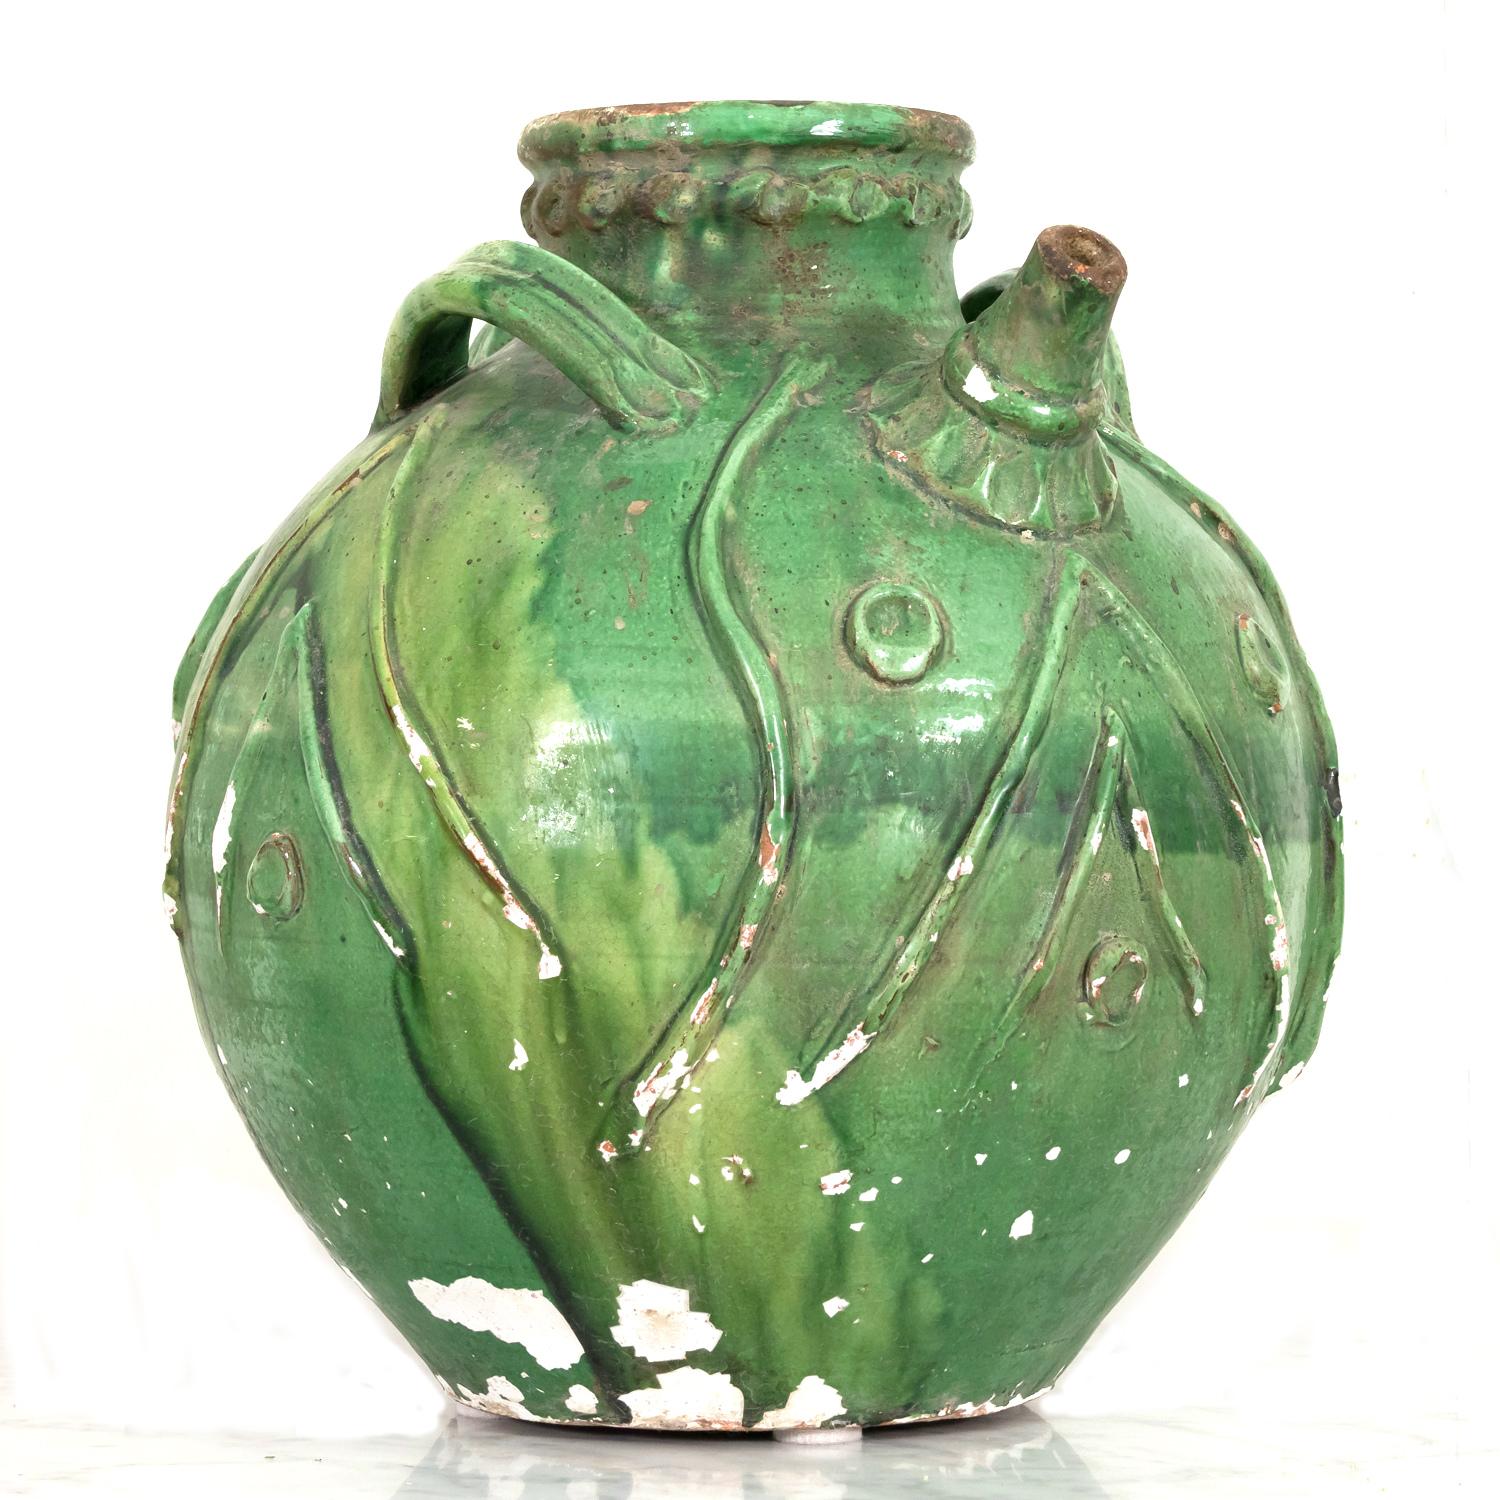 Exceptional Early 19th Century French Glazed Terracotta Walnut Oil Jug For Sale 1